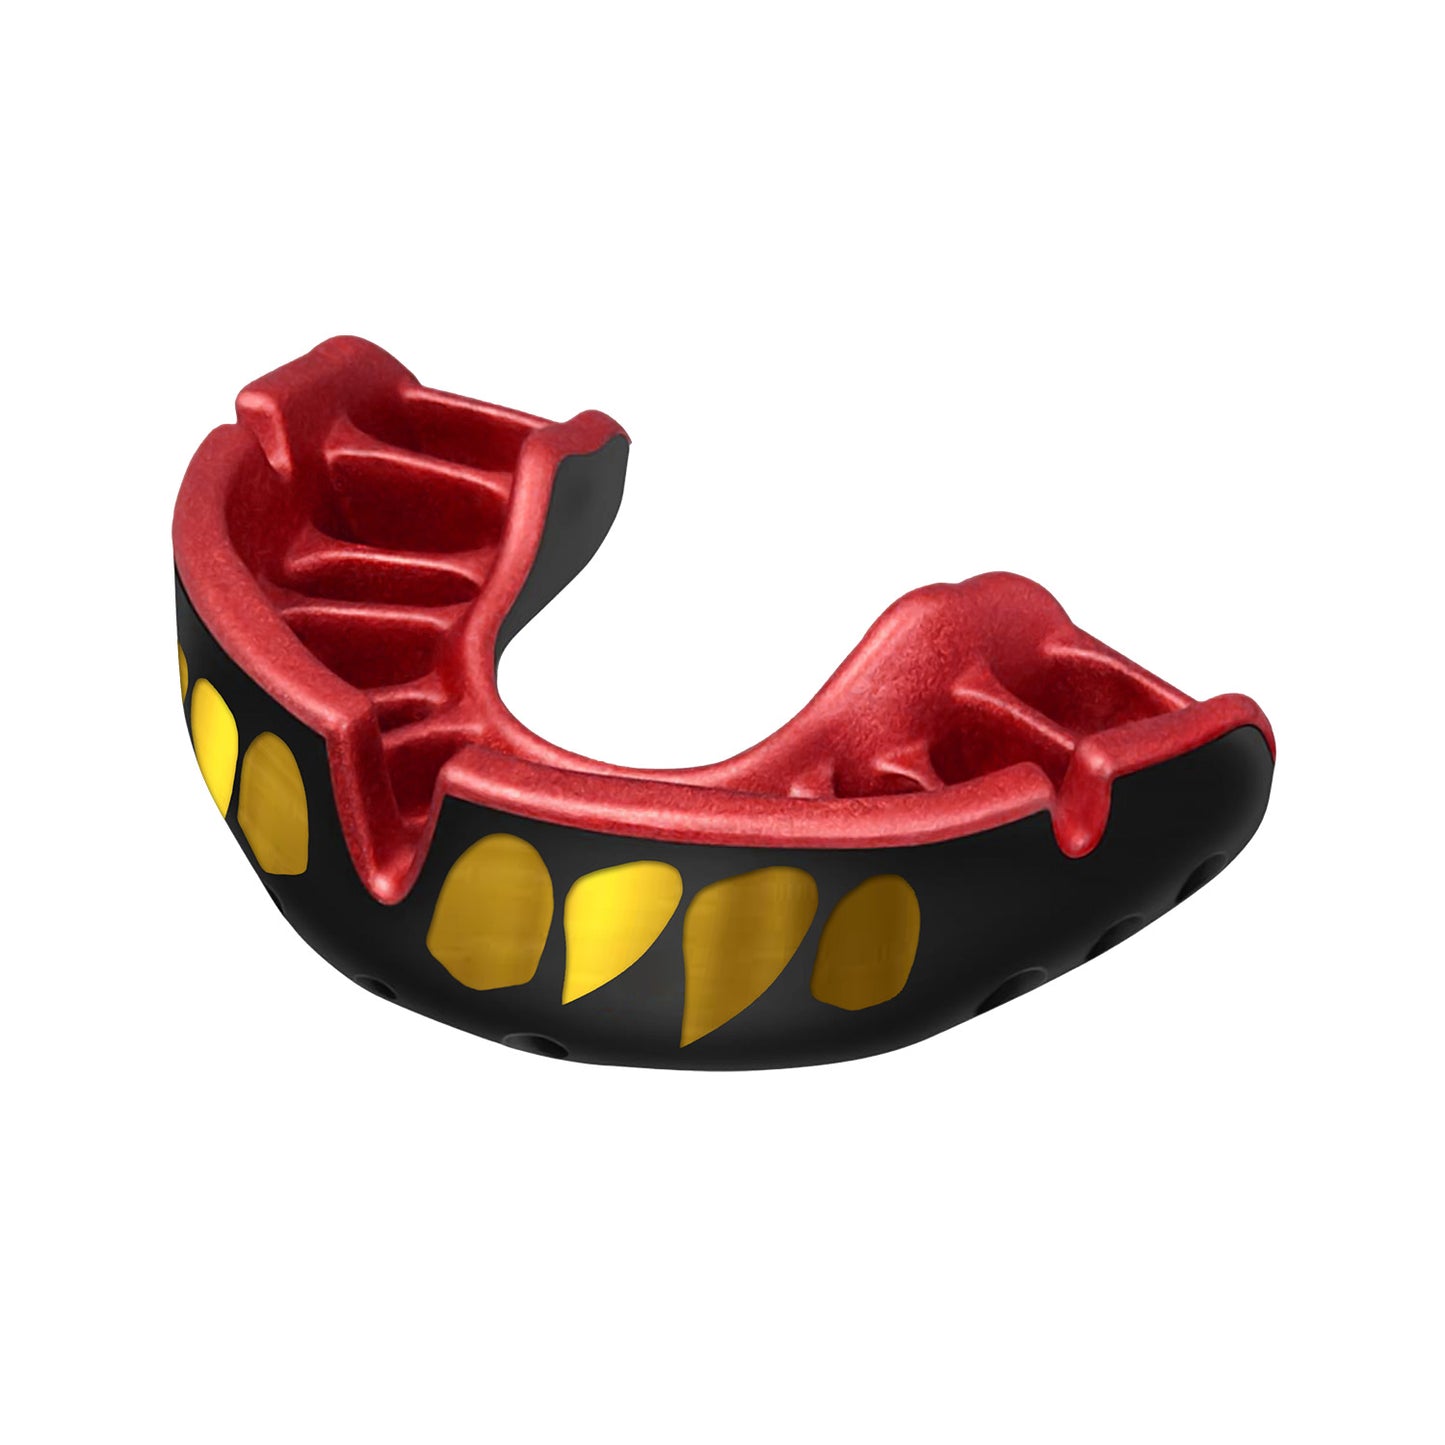 Opro Gold Mouthguard Grillz and Jawz